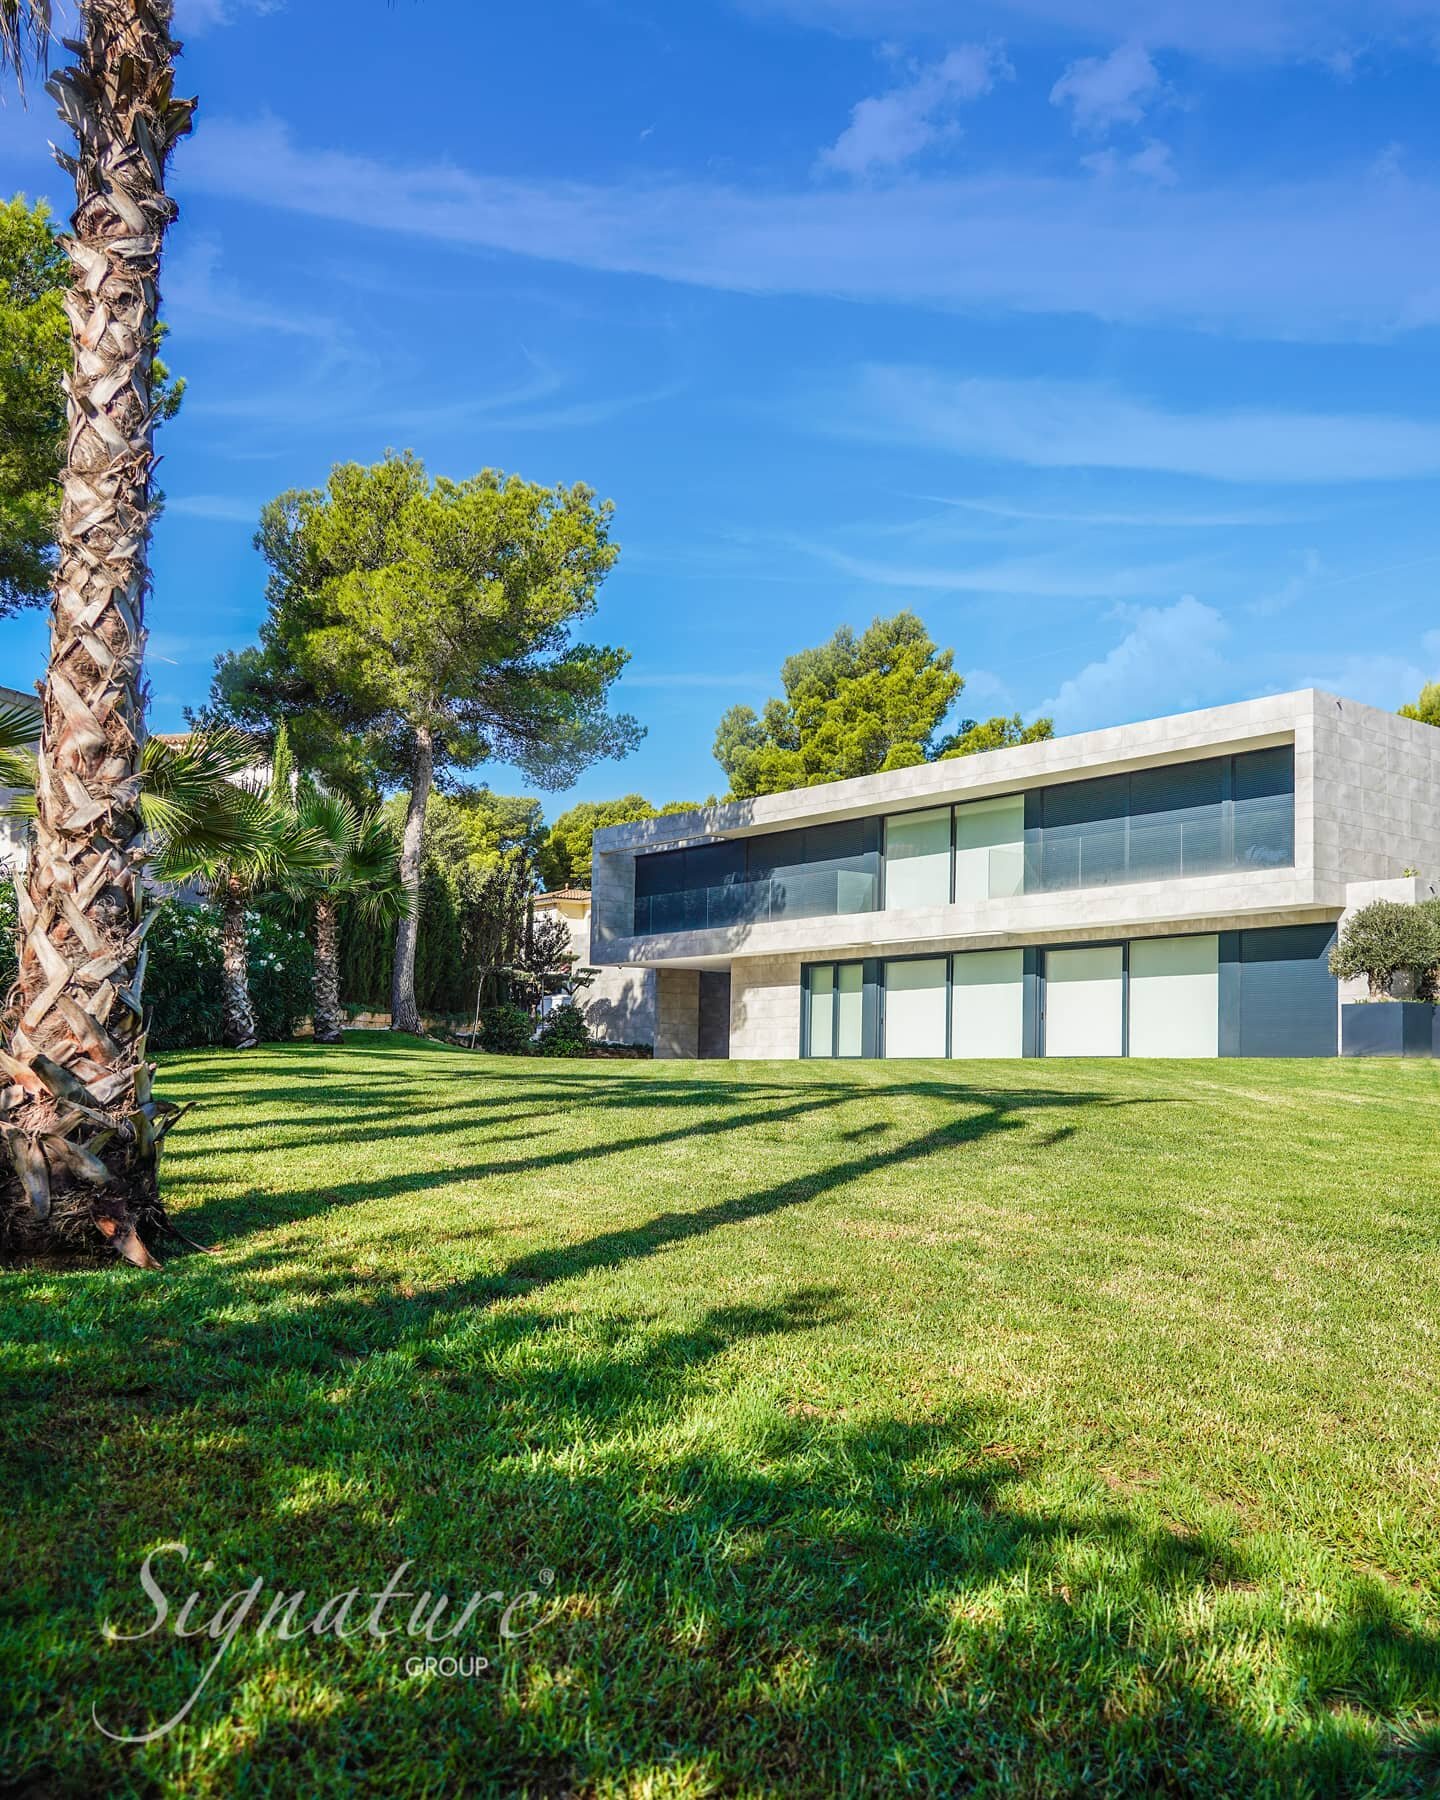 Revisiting one of our completed projects - Gregal - overlooking its green oversized garden.
.
.
.
#signaturegroupmallorca #manufacturerofexcellence #propertydevelopment #property #minimal #design #mallorca #development #completedproject #architecture